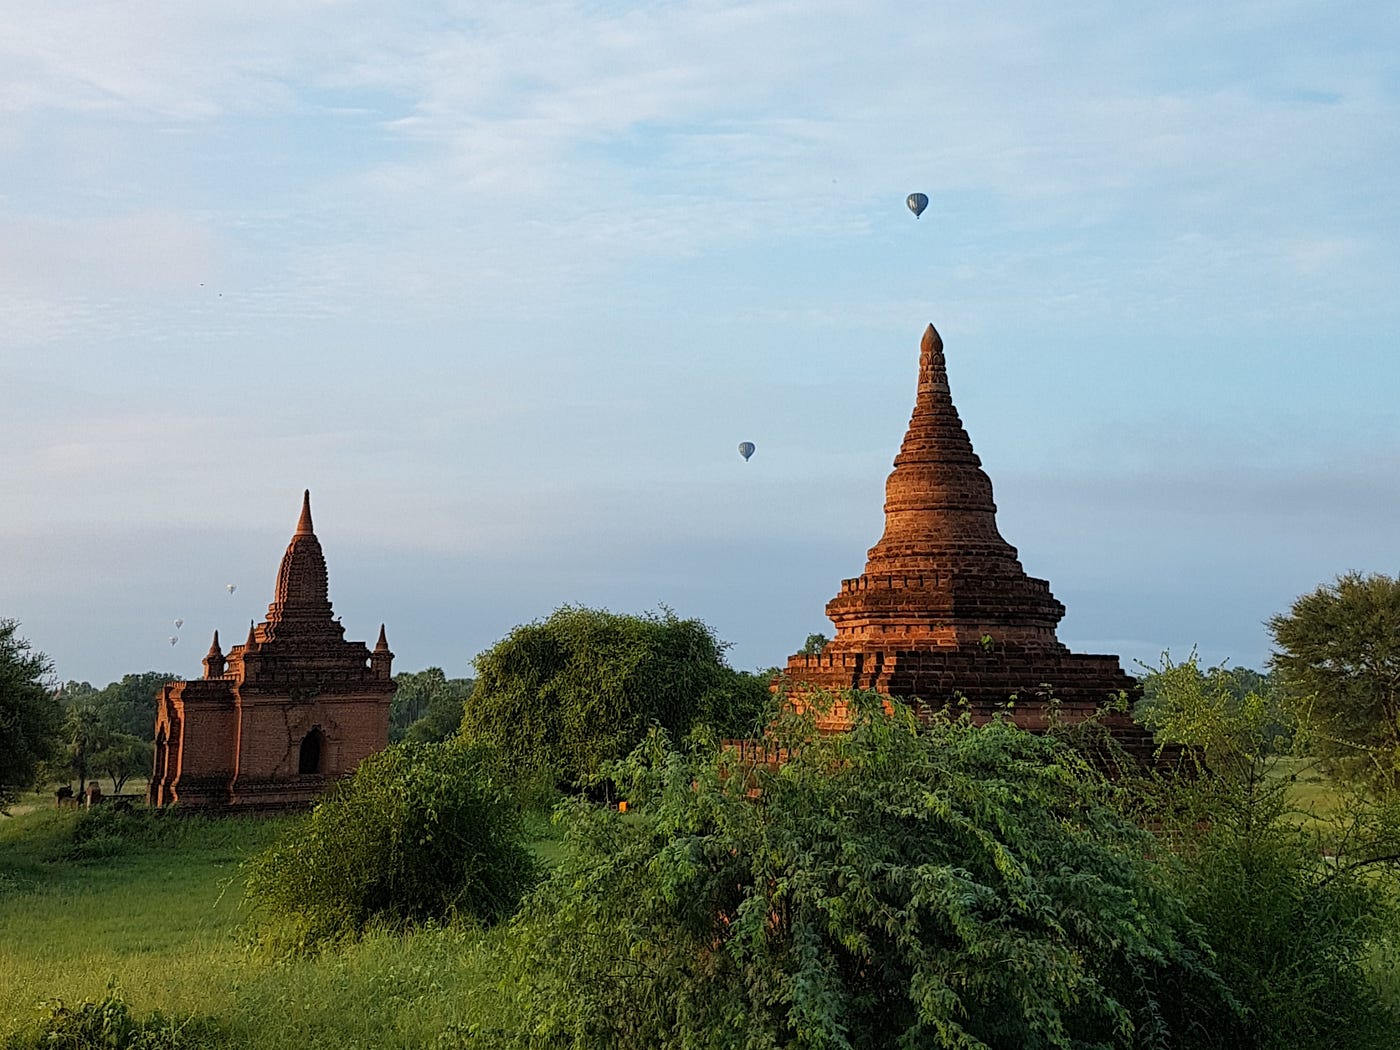 Photo of temple structures in Bagan with hot air balloons in the background